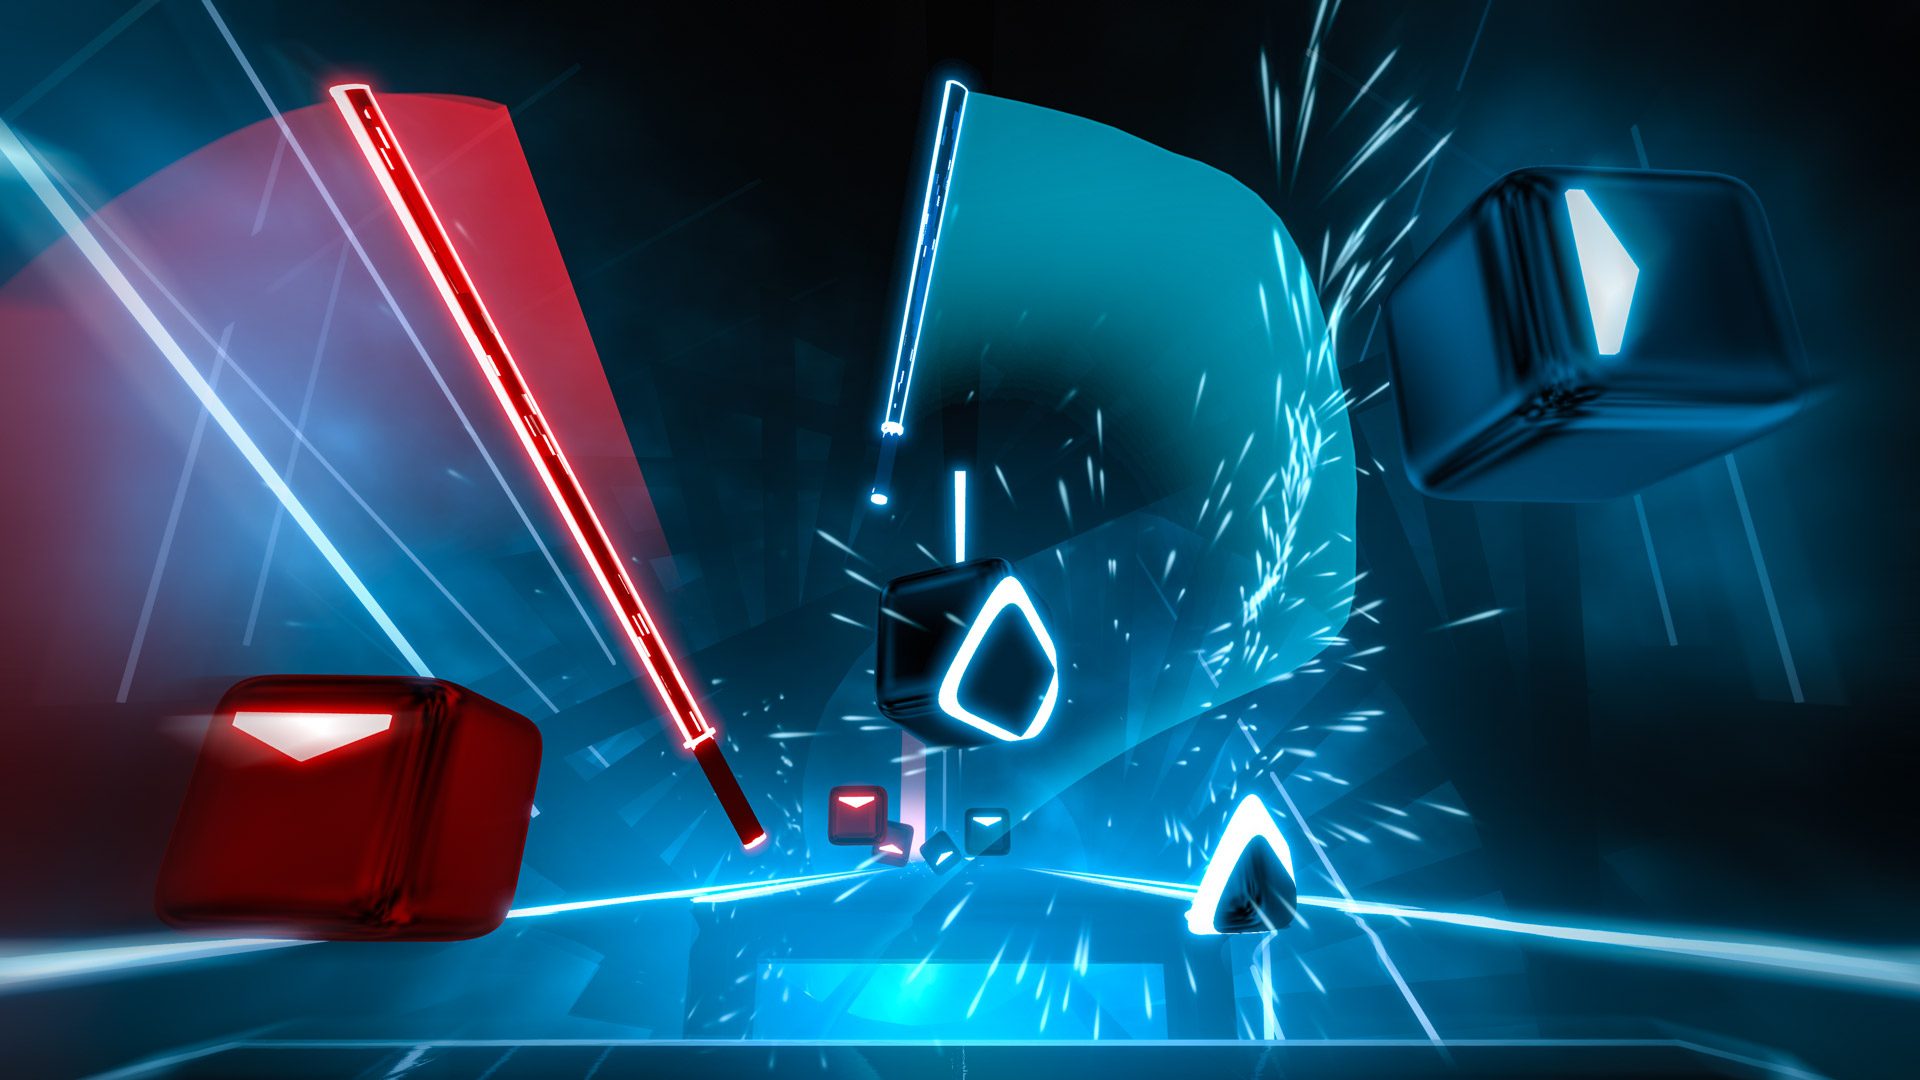 Beat Saber To Get More Songs Expert Difficulty And Pro Mode